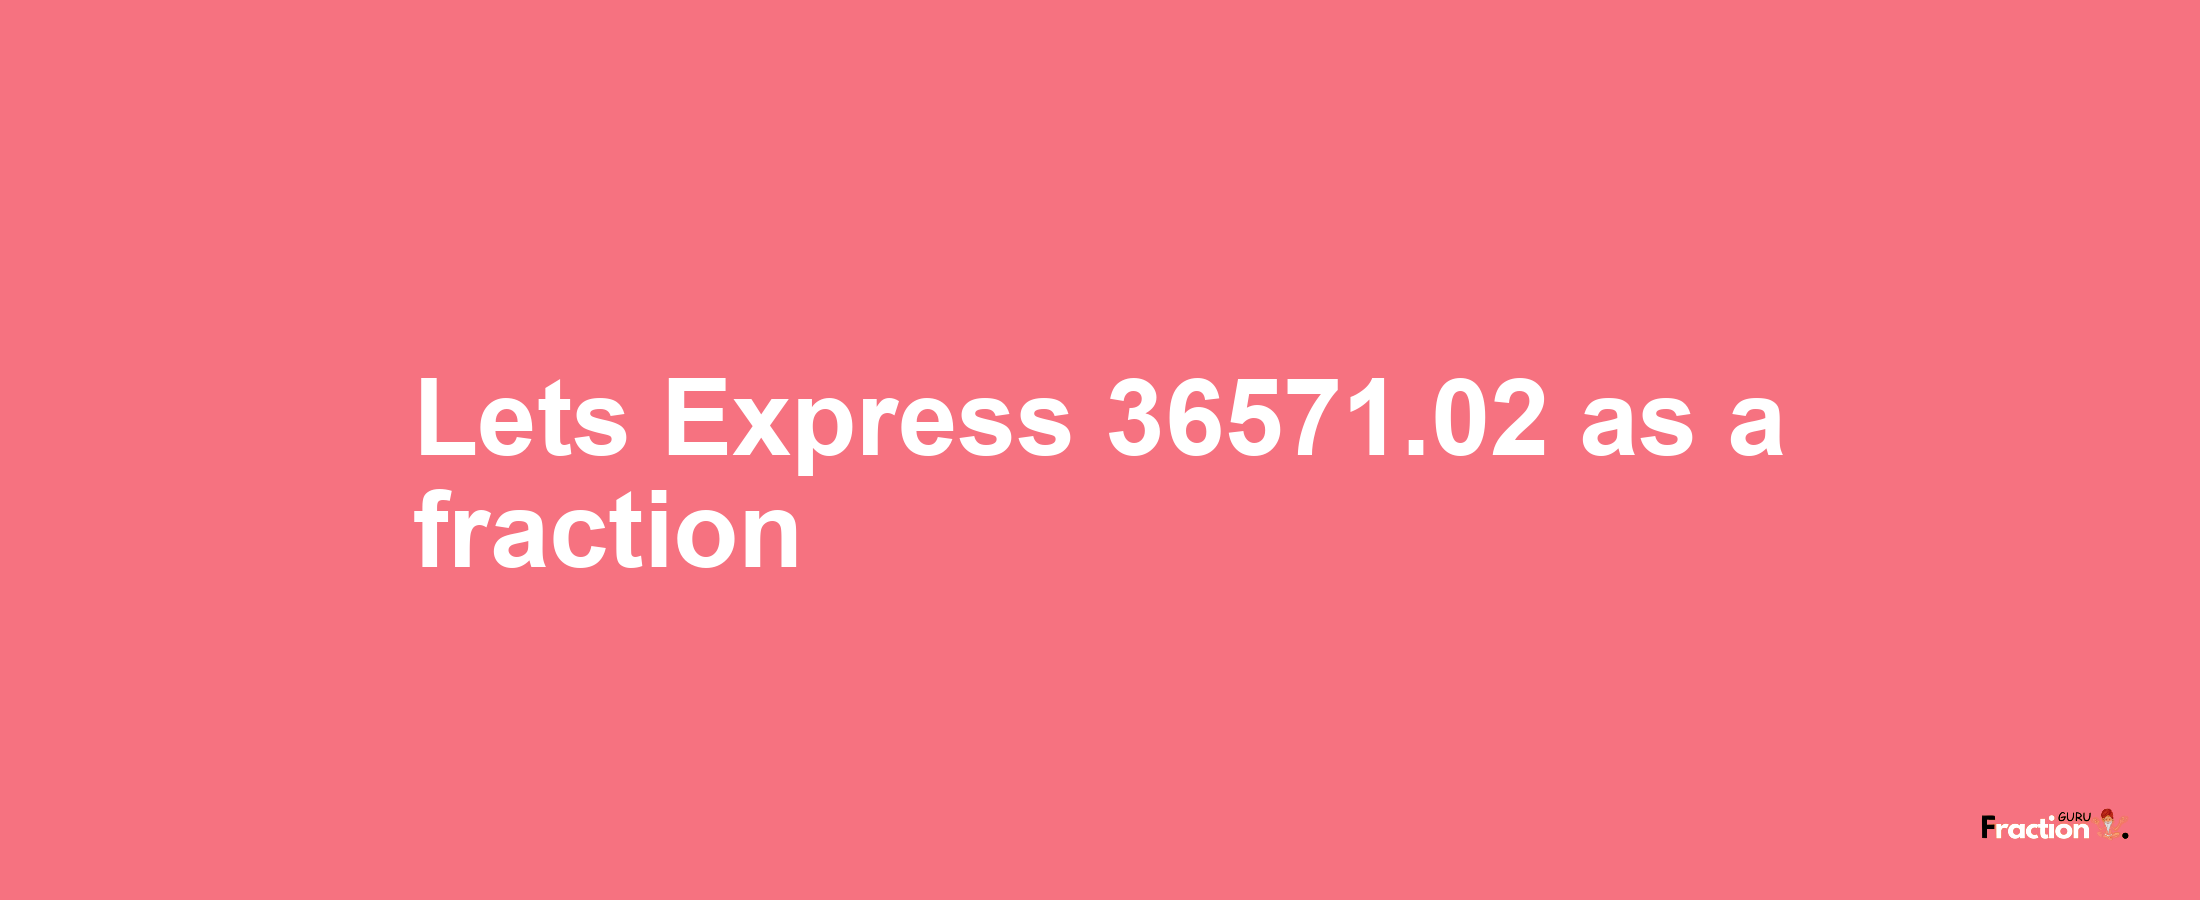 Lets Express 36571.02 as afraction